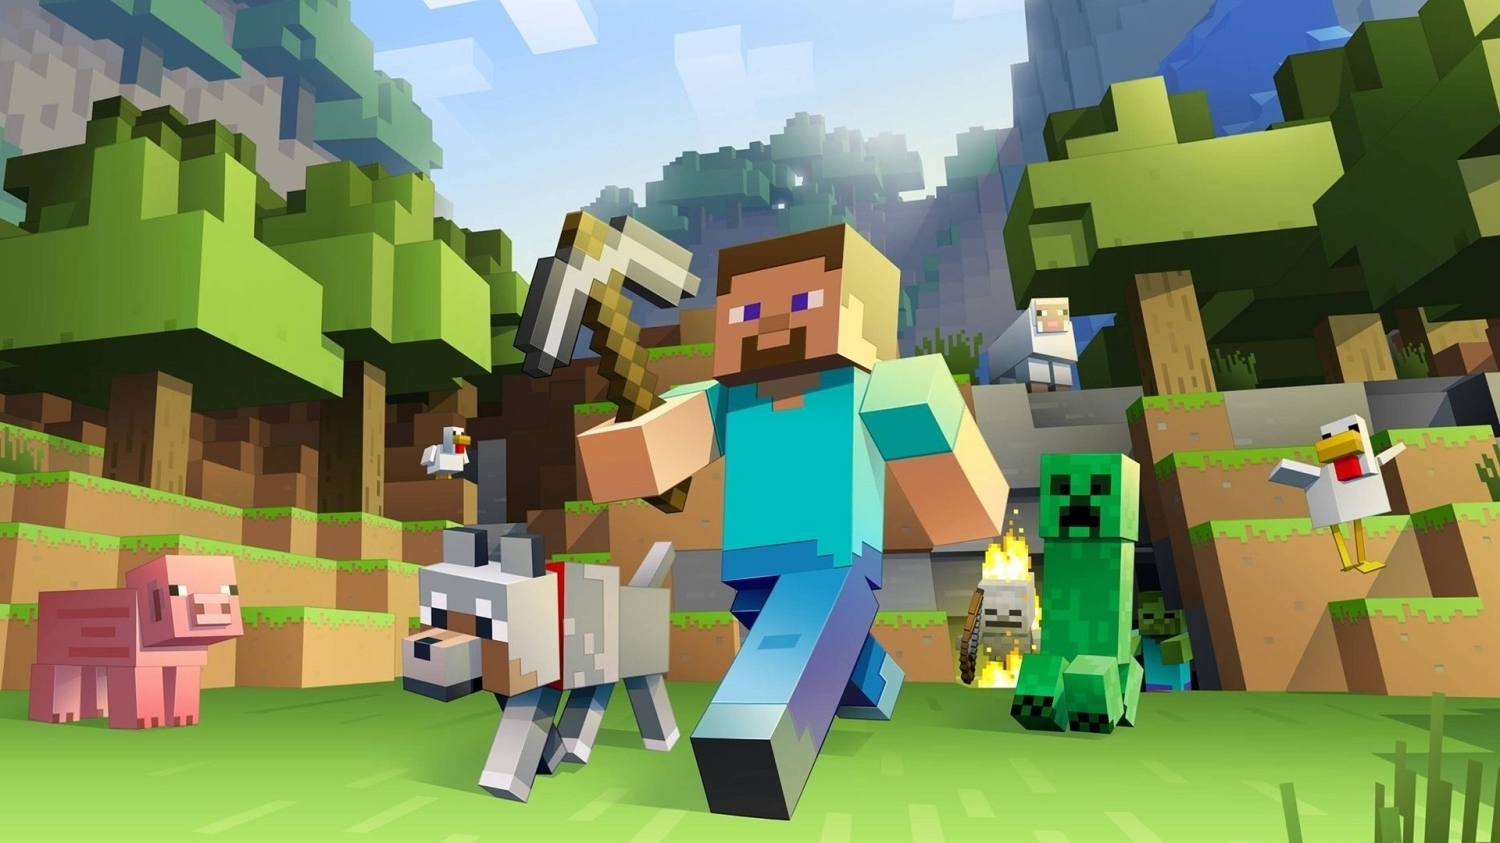 92143_1_minecraft-makes-4x-more-revenue-on-switch-than-xbox_full.jpg